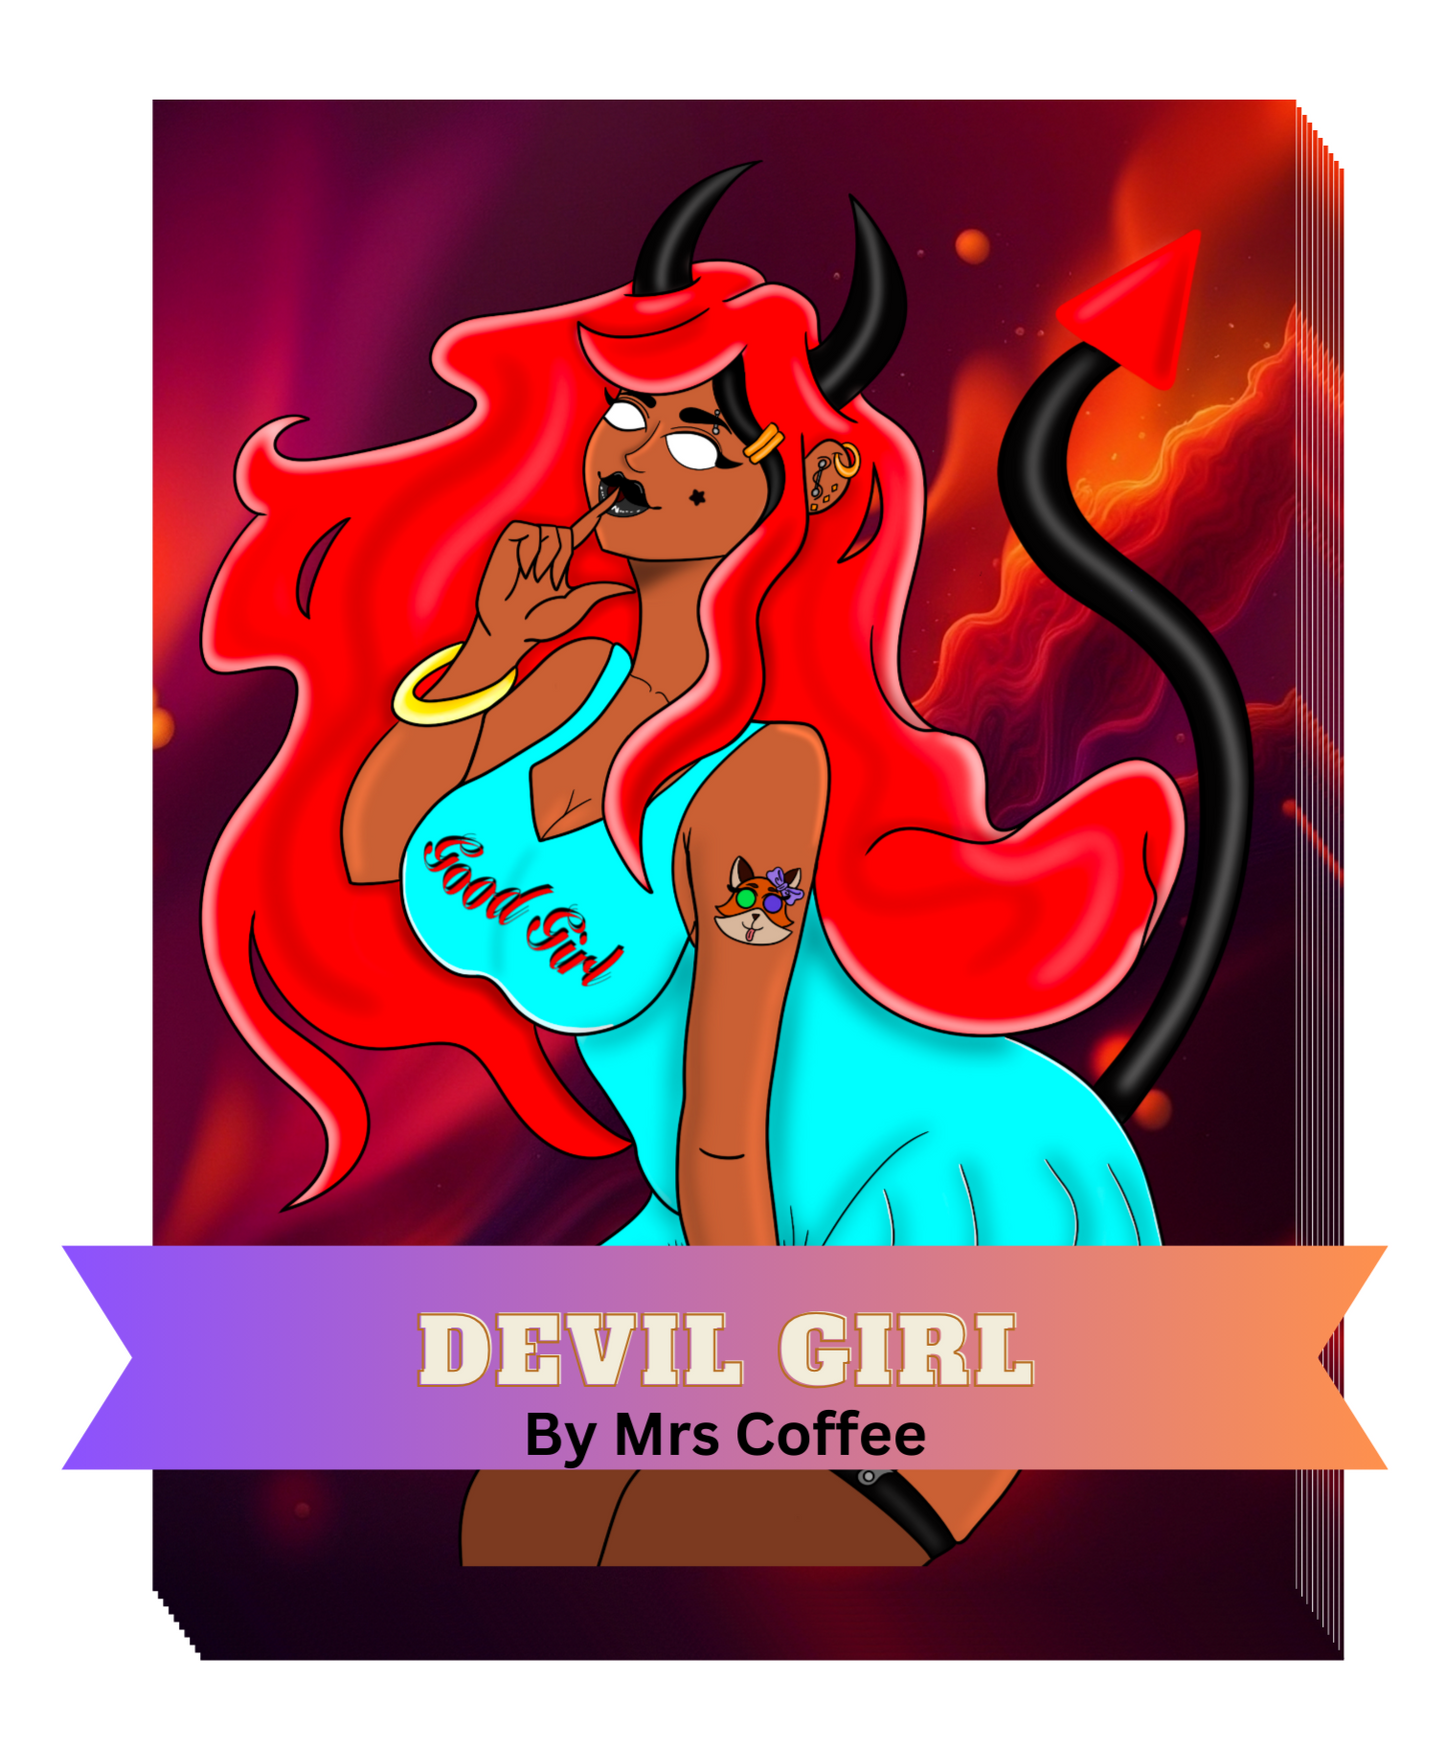 "Devil Girl" by Mrs Coffee Decorative Diamond Painting Release Papers